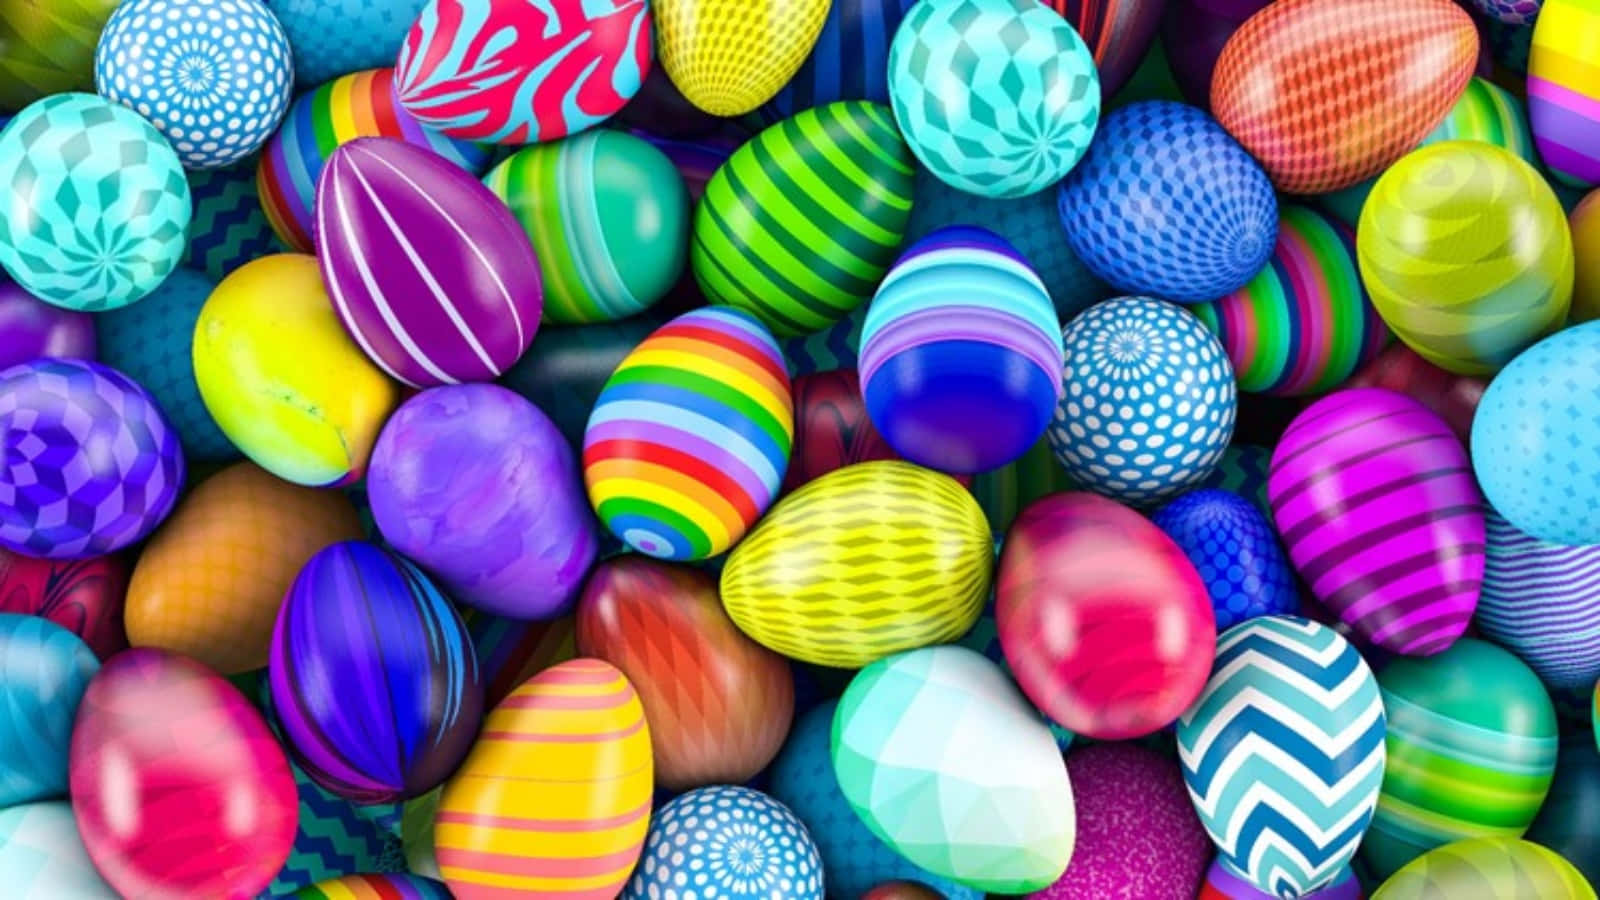 Astounding Easter Egg Designs Picture